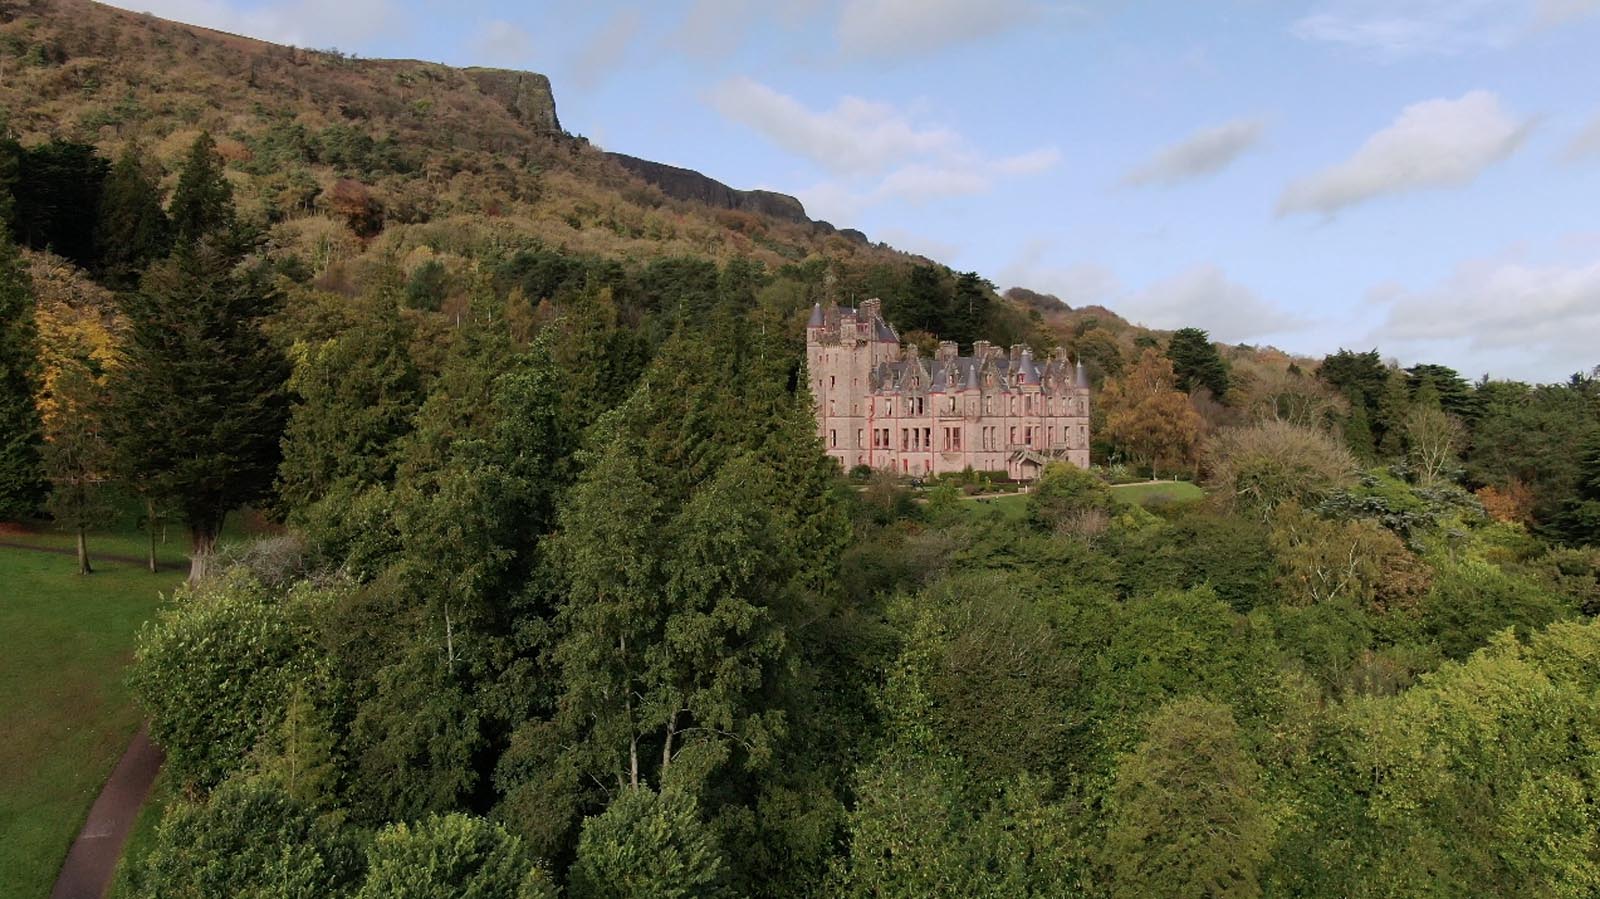 Commercial, residential, property drone photography and video Dublin, Wicklow, Monaghan, Cavan, Ireland portfolio - screenshot 5 of Belfast Castle video